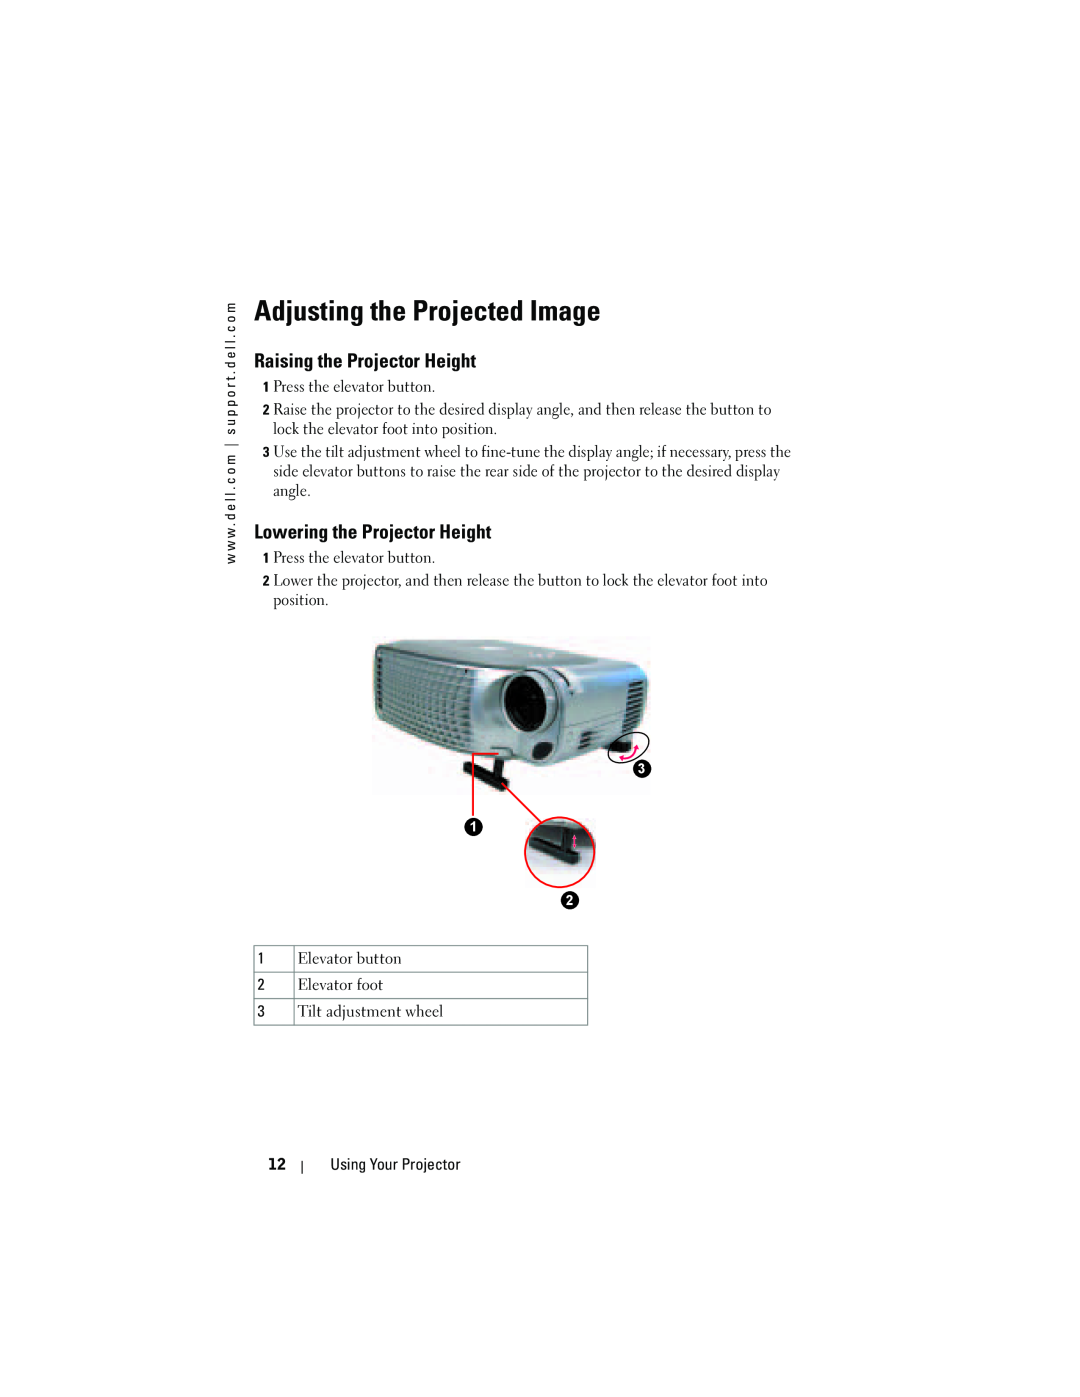 Dell 1200MP owner manual Adjusting the Projected Image, Raising the Projector Height, Lowering the Projector Height 